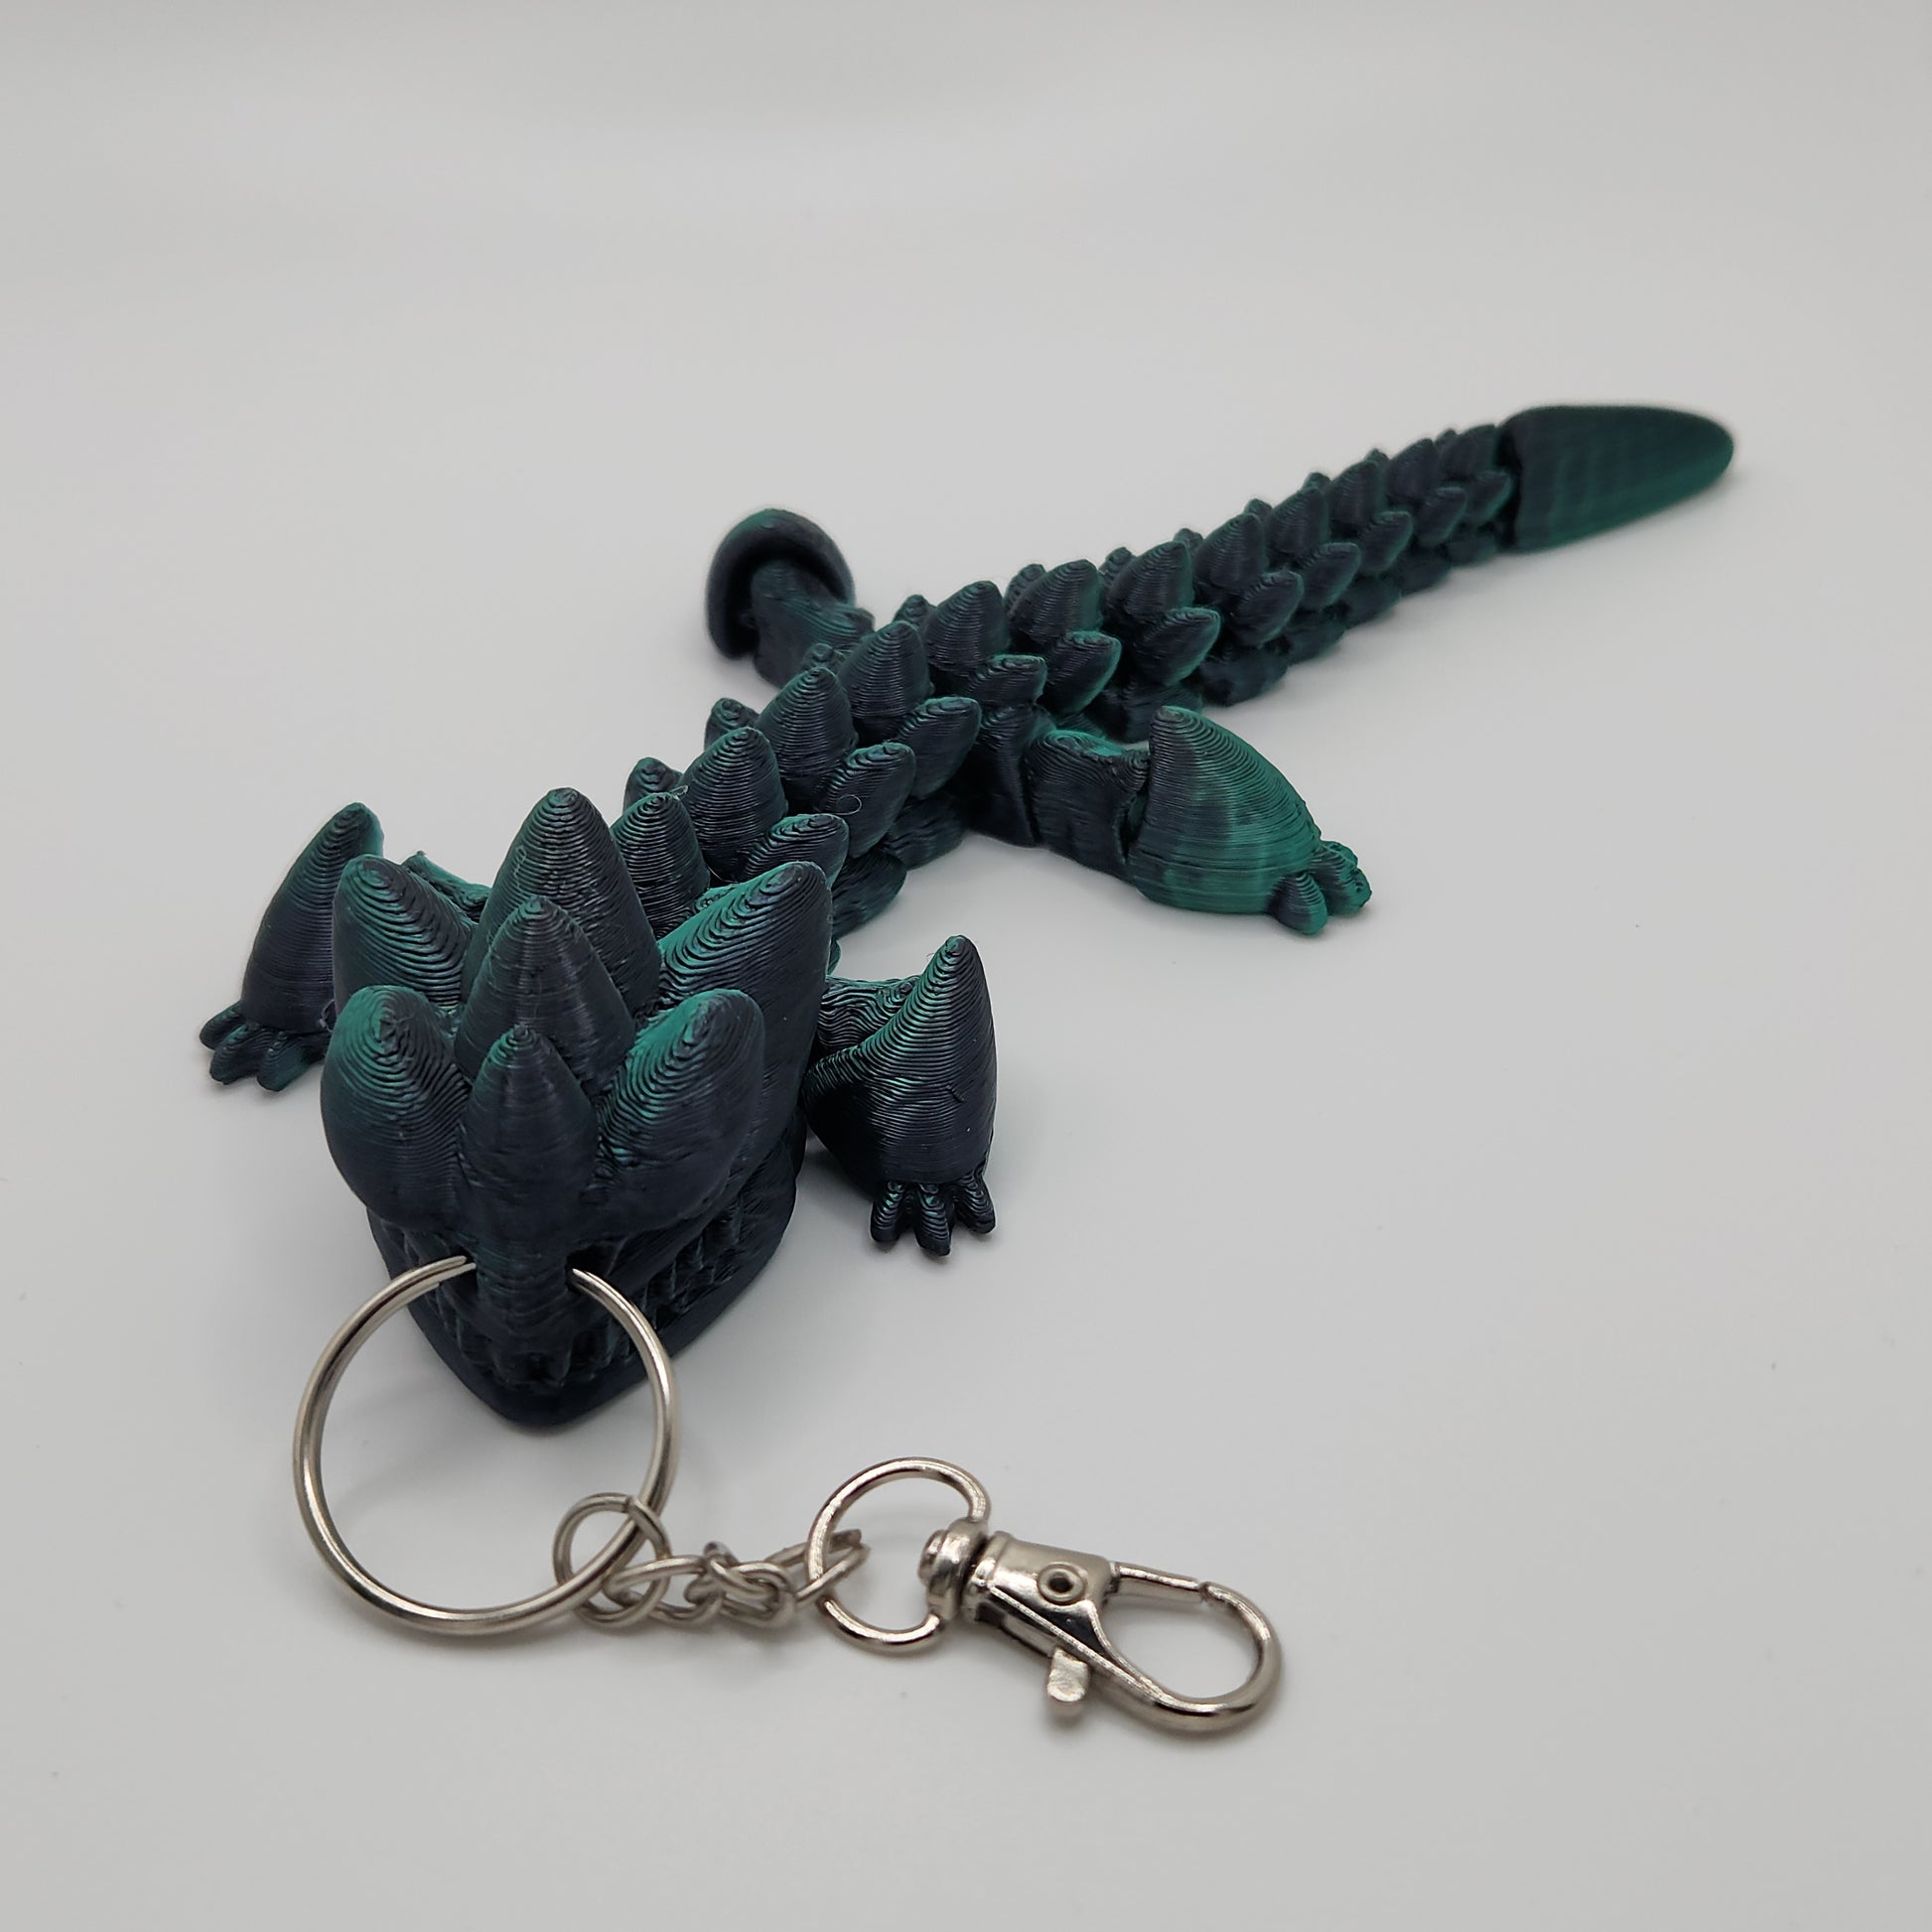 A side view of the black and teal articulated dragon keychain stretched out, displaying its full length and detailed scales.